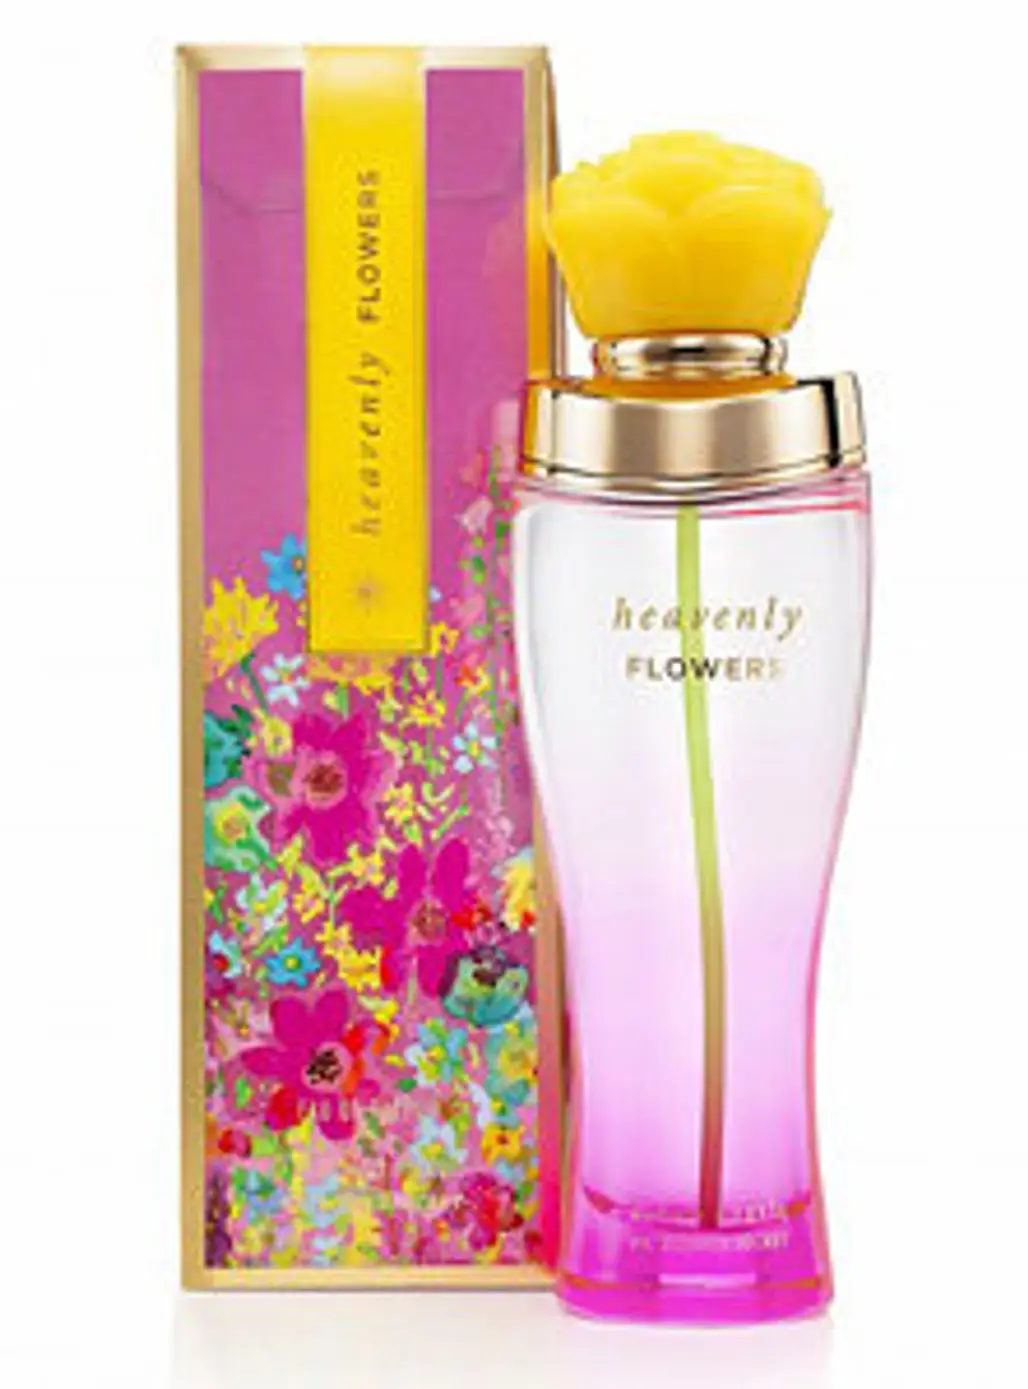 Limited-edition Dream Angels Heavenly Flowers